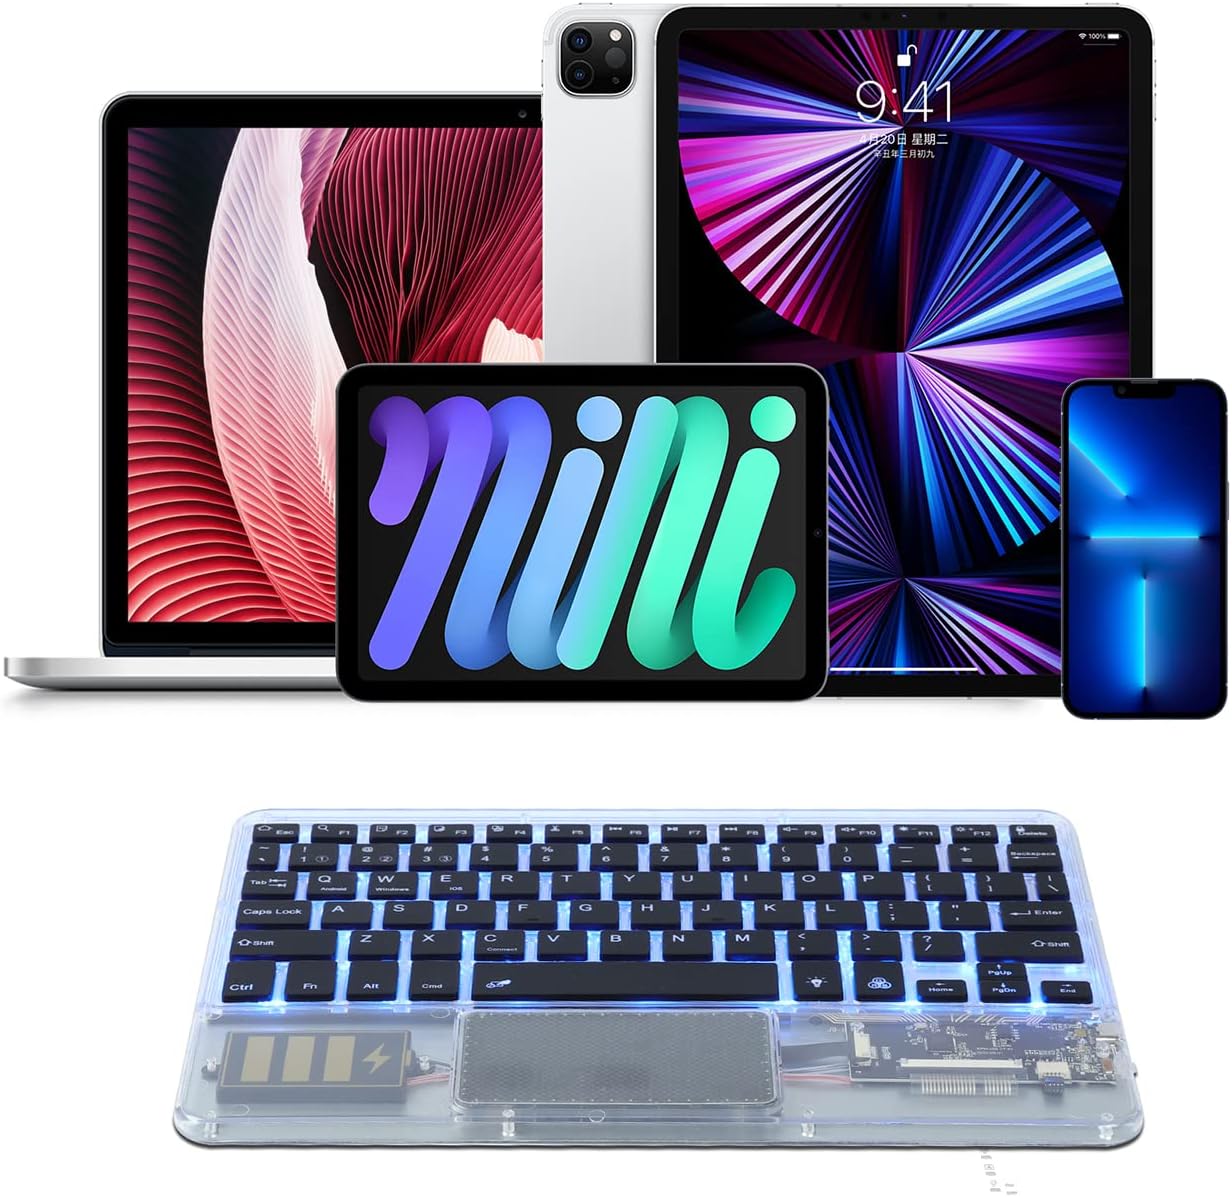 Ultra-Slim Bluetooth Keyboard 7 Colors Backlit Portable Mini Wireless Keyboard Rechargeable for Apple Ipad Iphone Samsung Tablet Phone Smartphone Ios Android Windows-Transparent